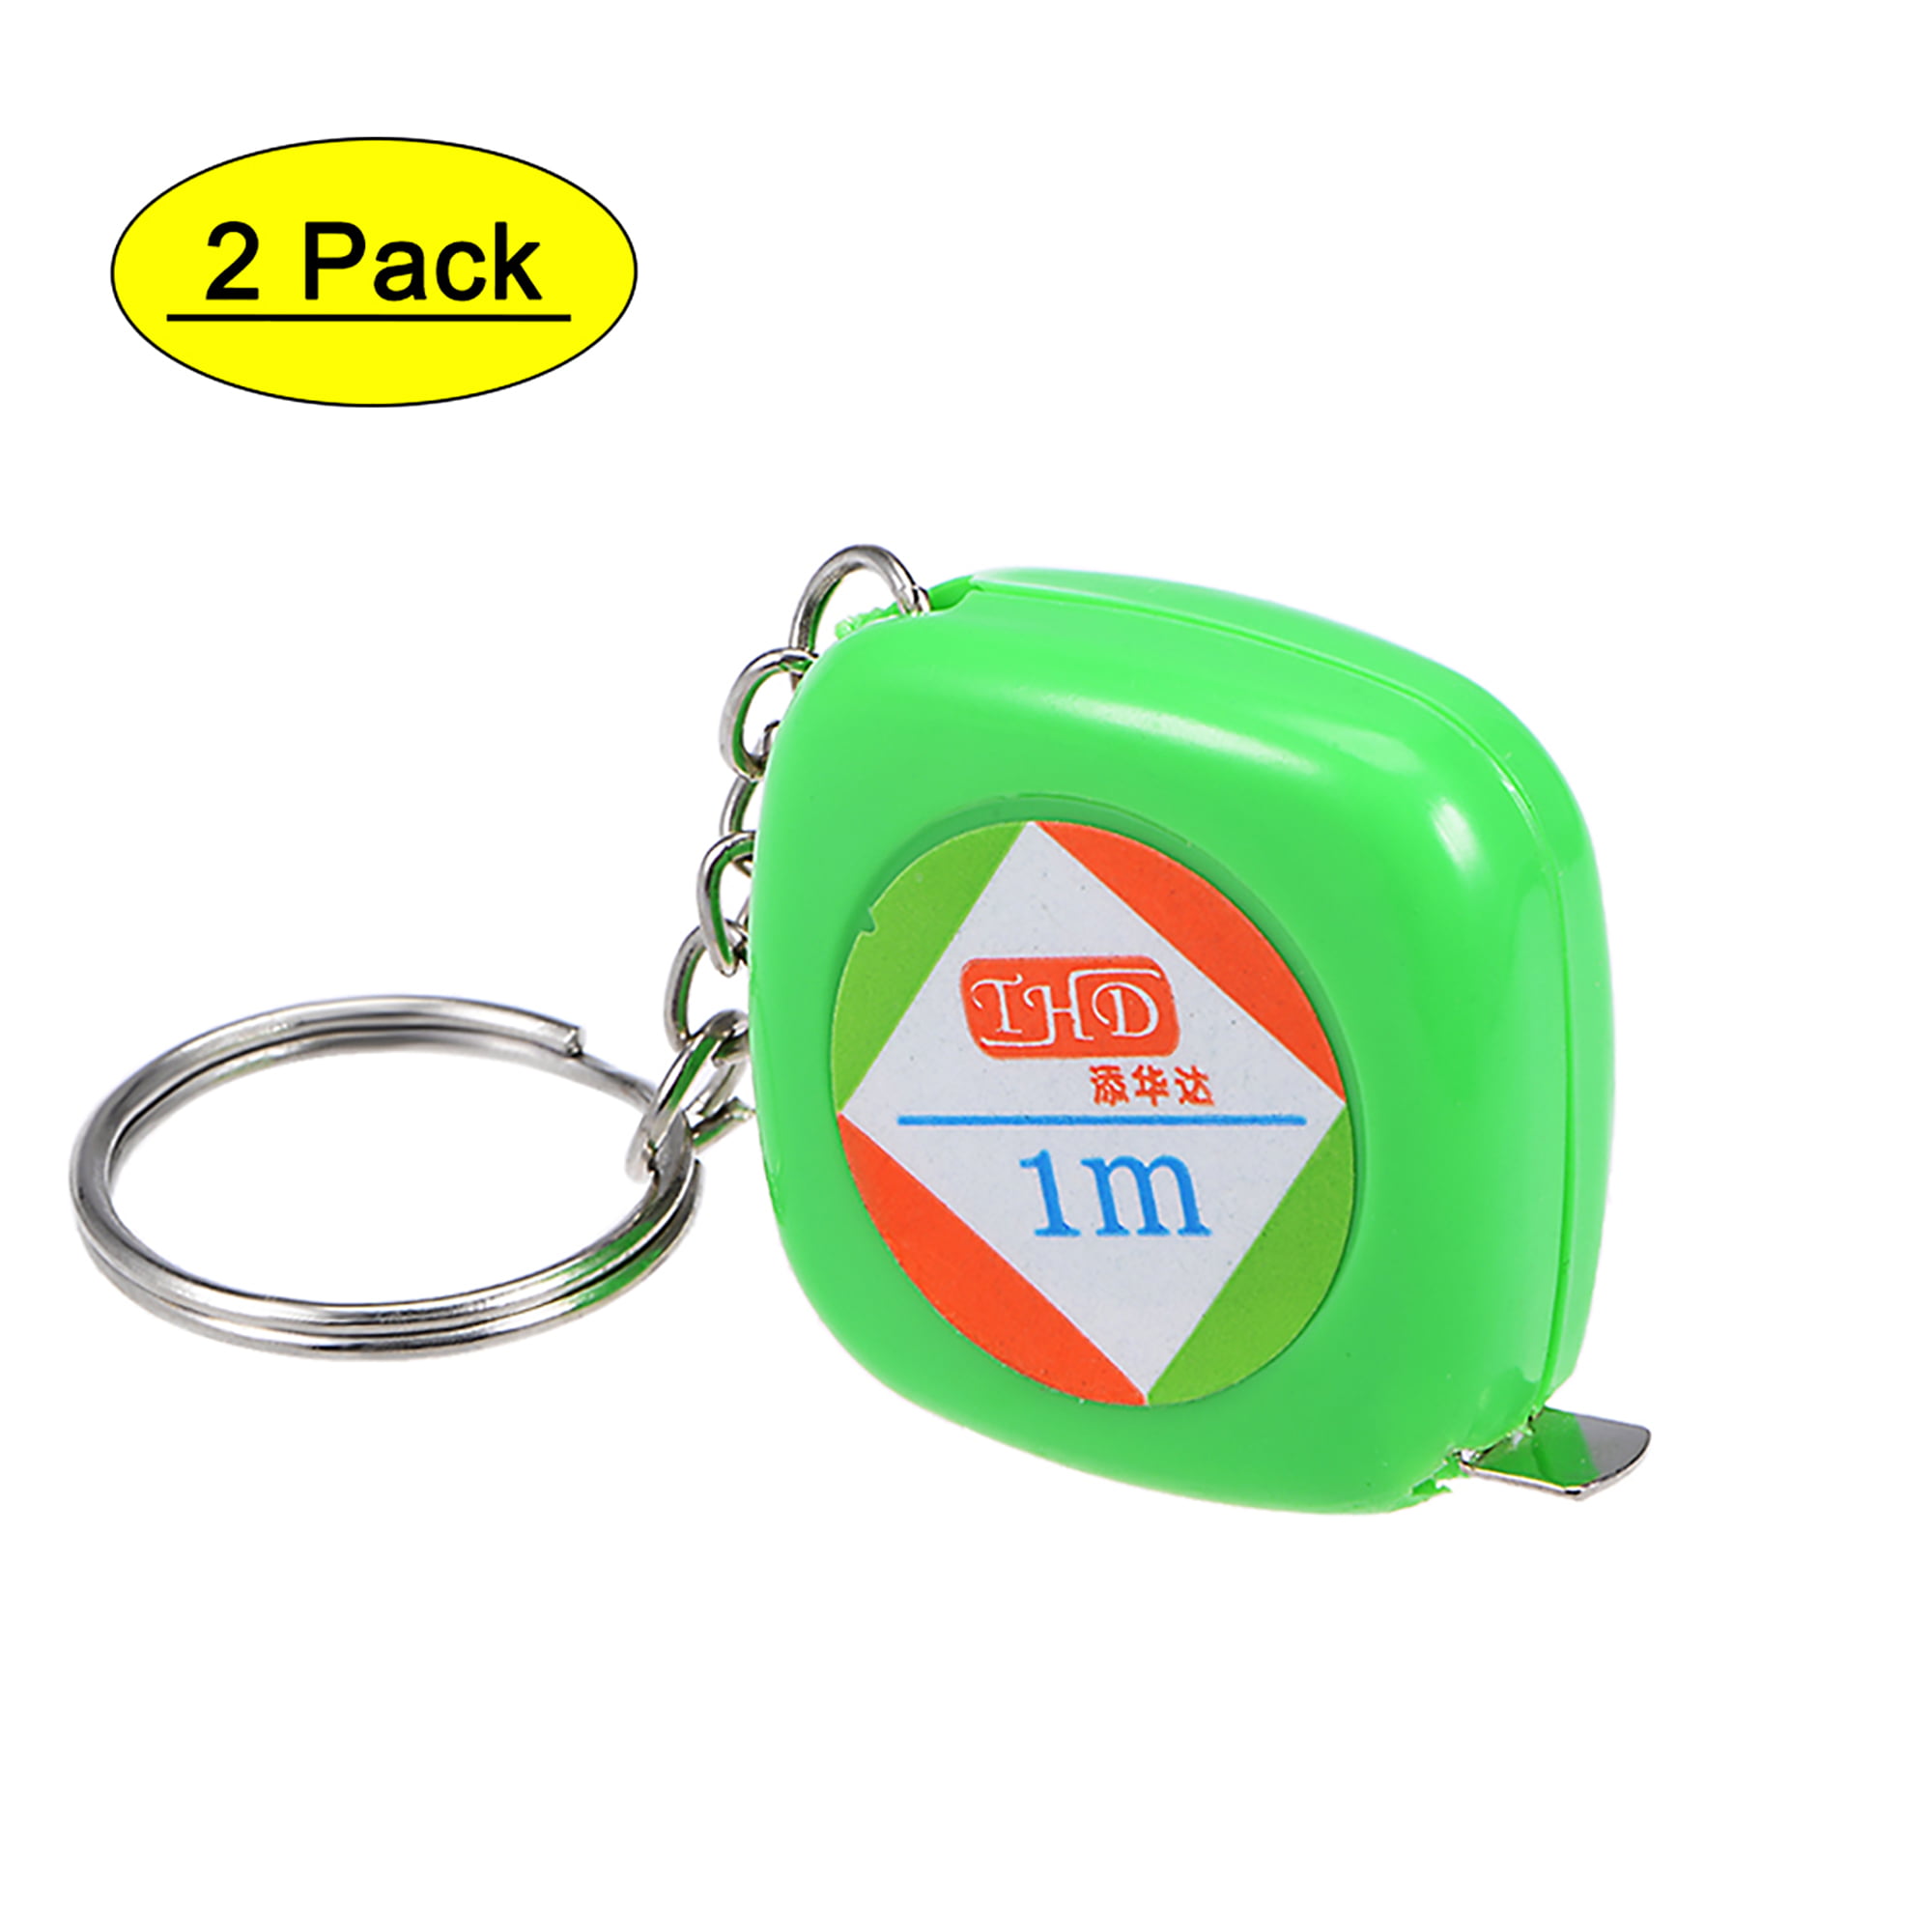 uxcell 5 Pcs Orange Green Case Retractable Tape Measure Keyring 1M 3 Ft 39 inch 